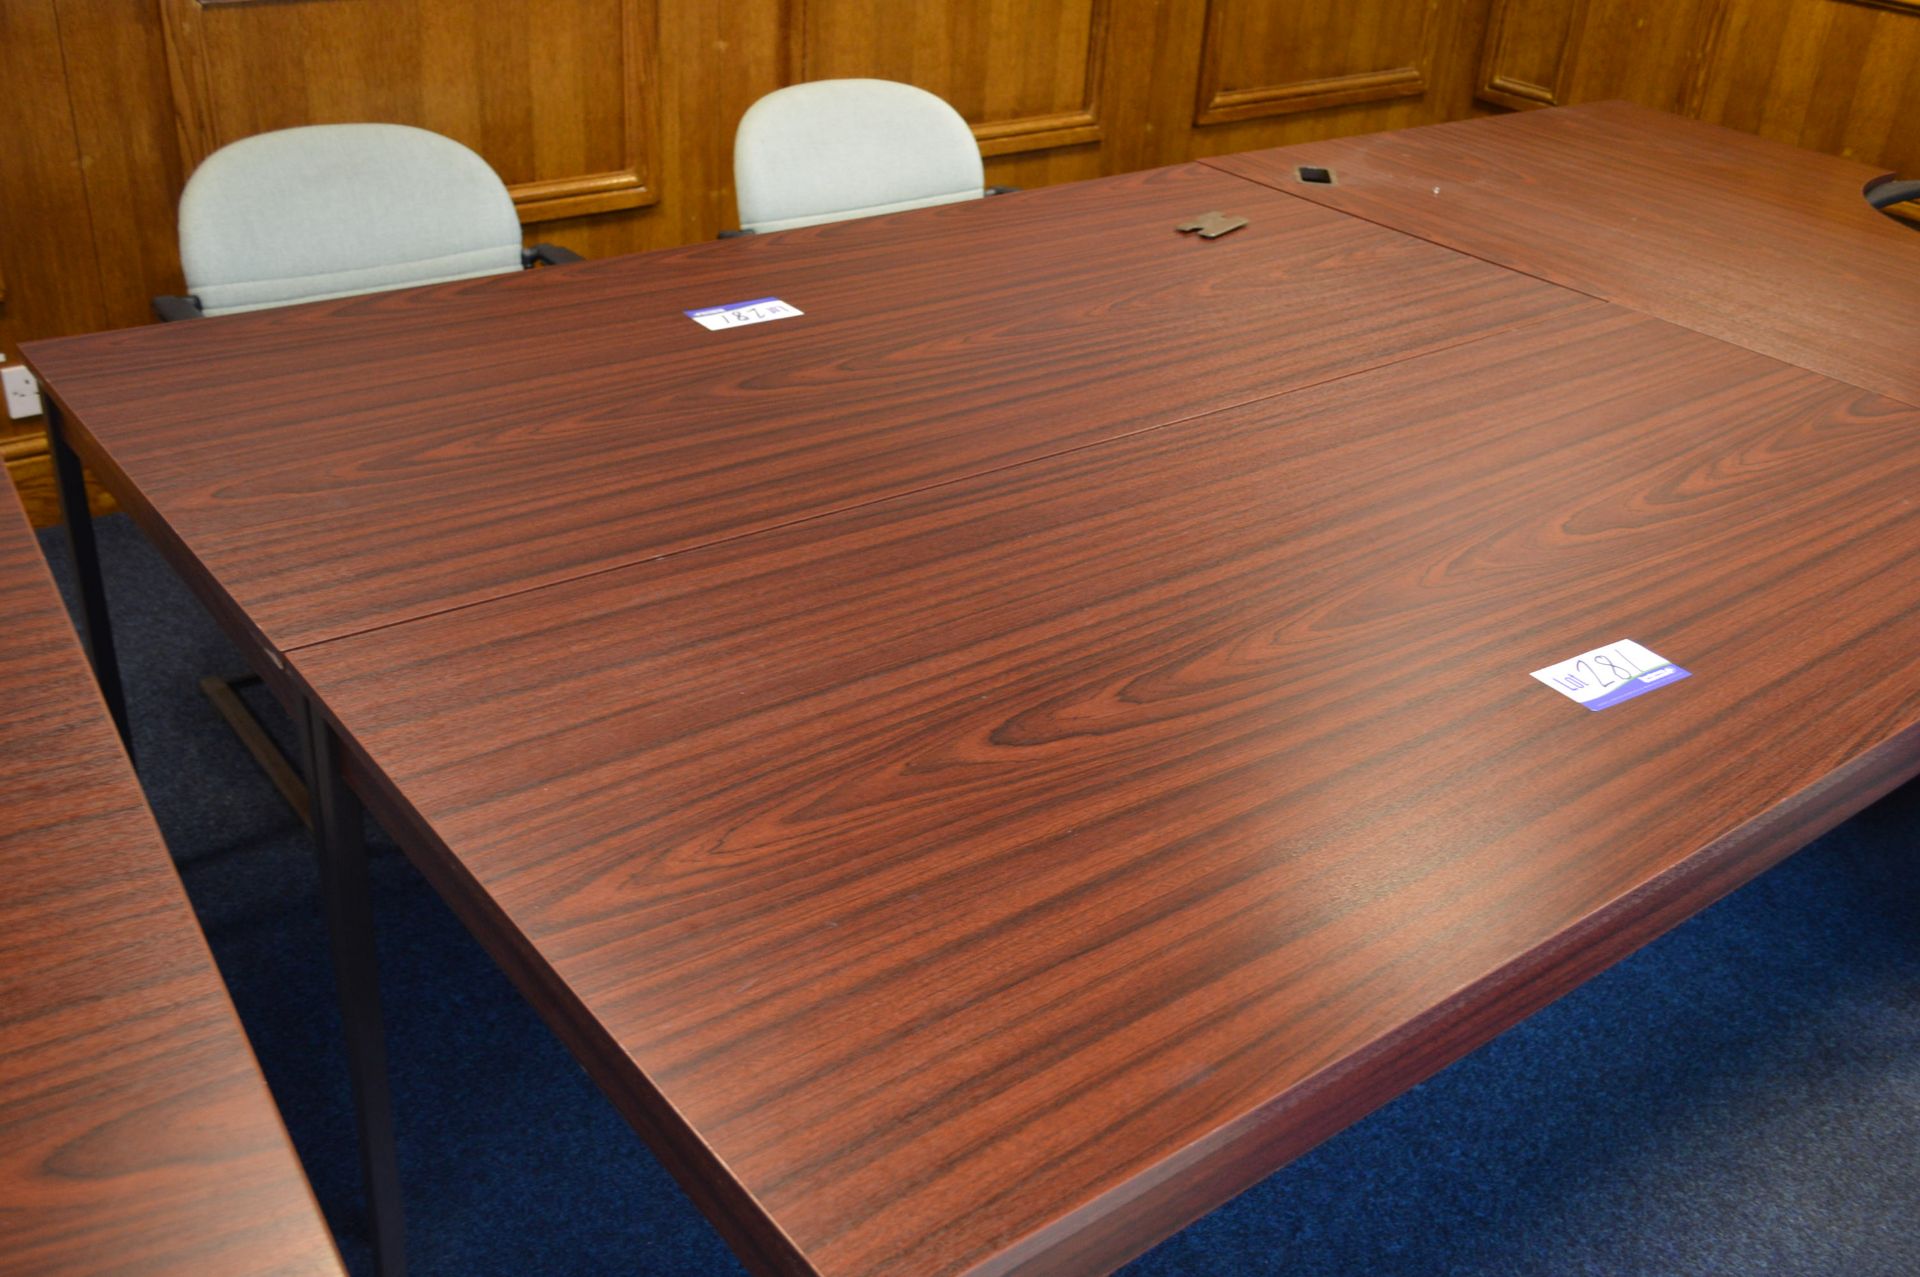 Two Office Tables, each 1.8m long